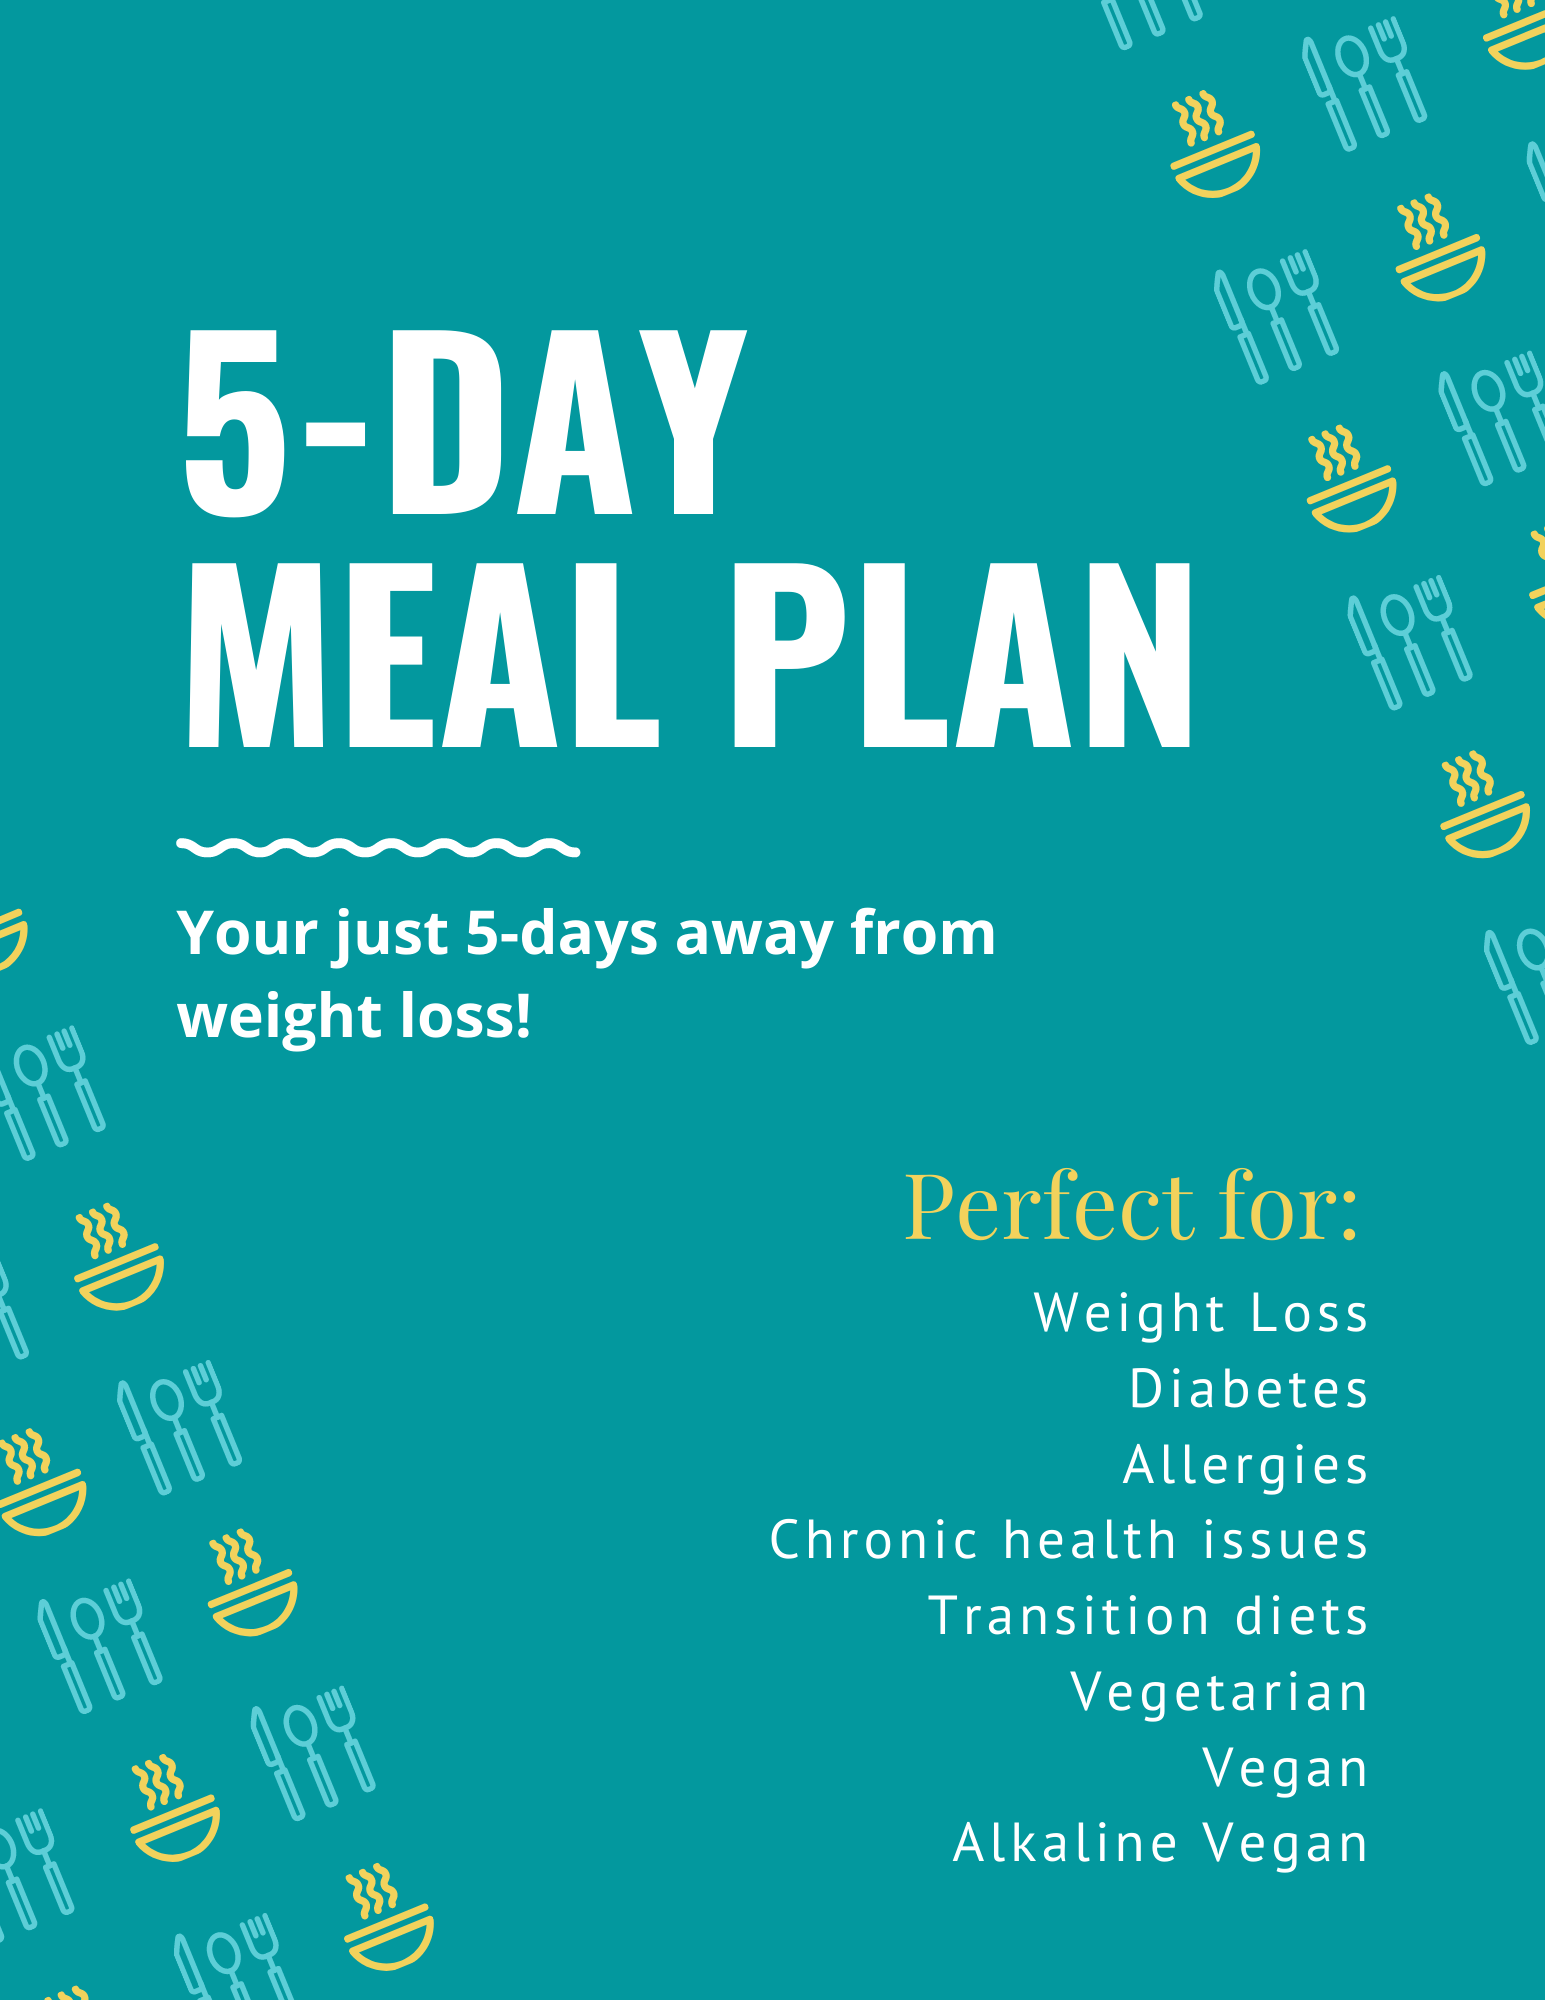 5 meal a day plan